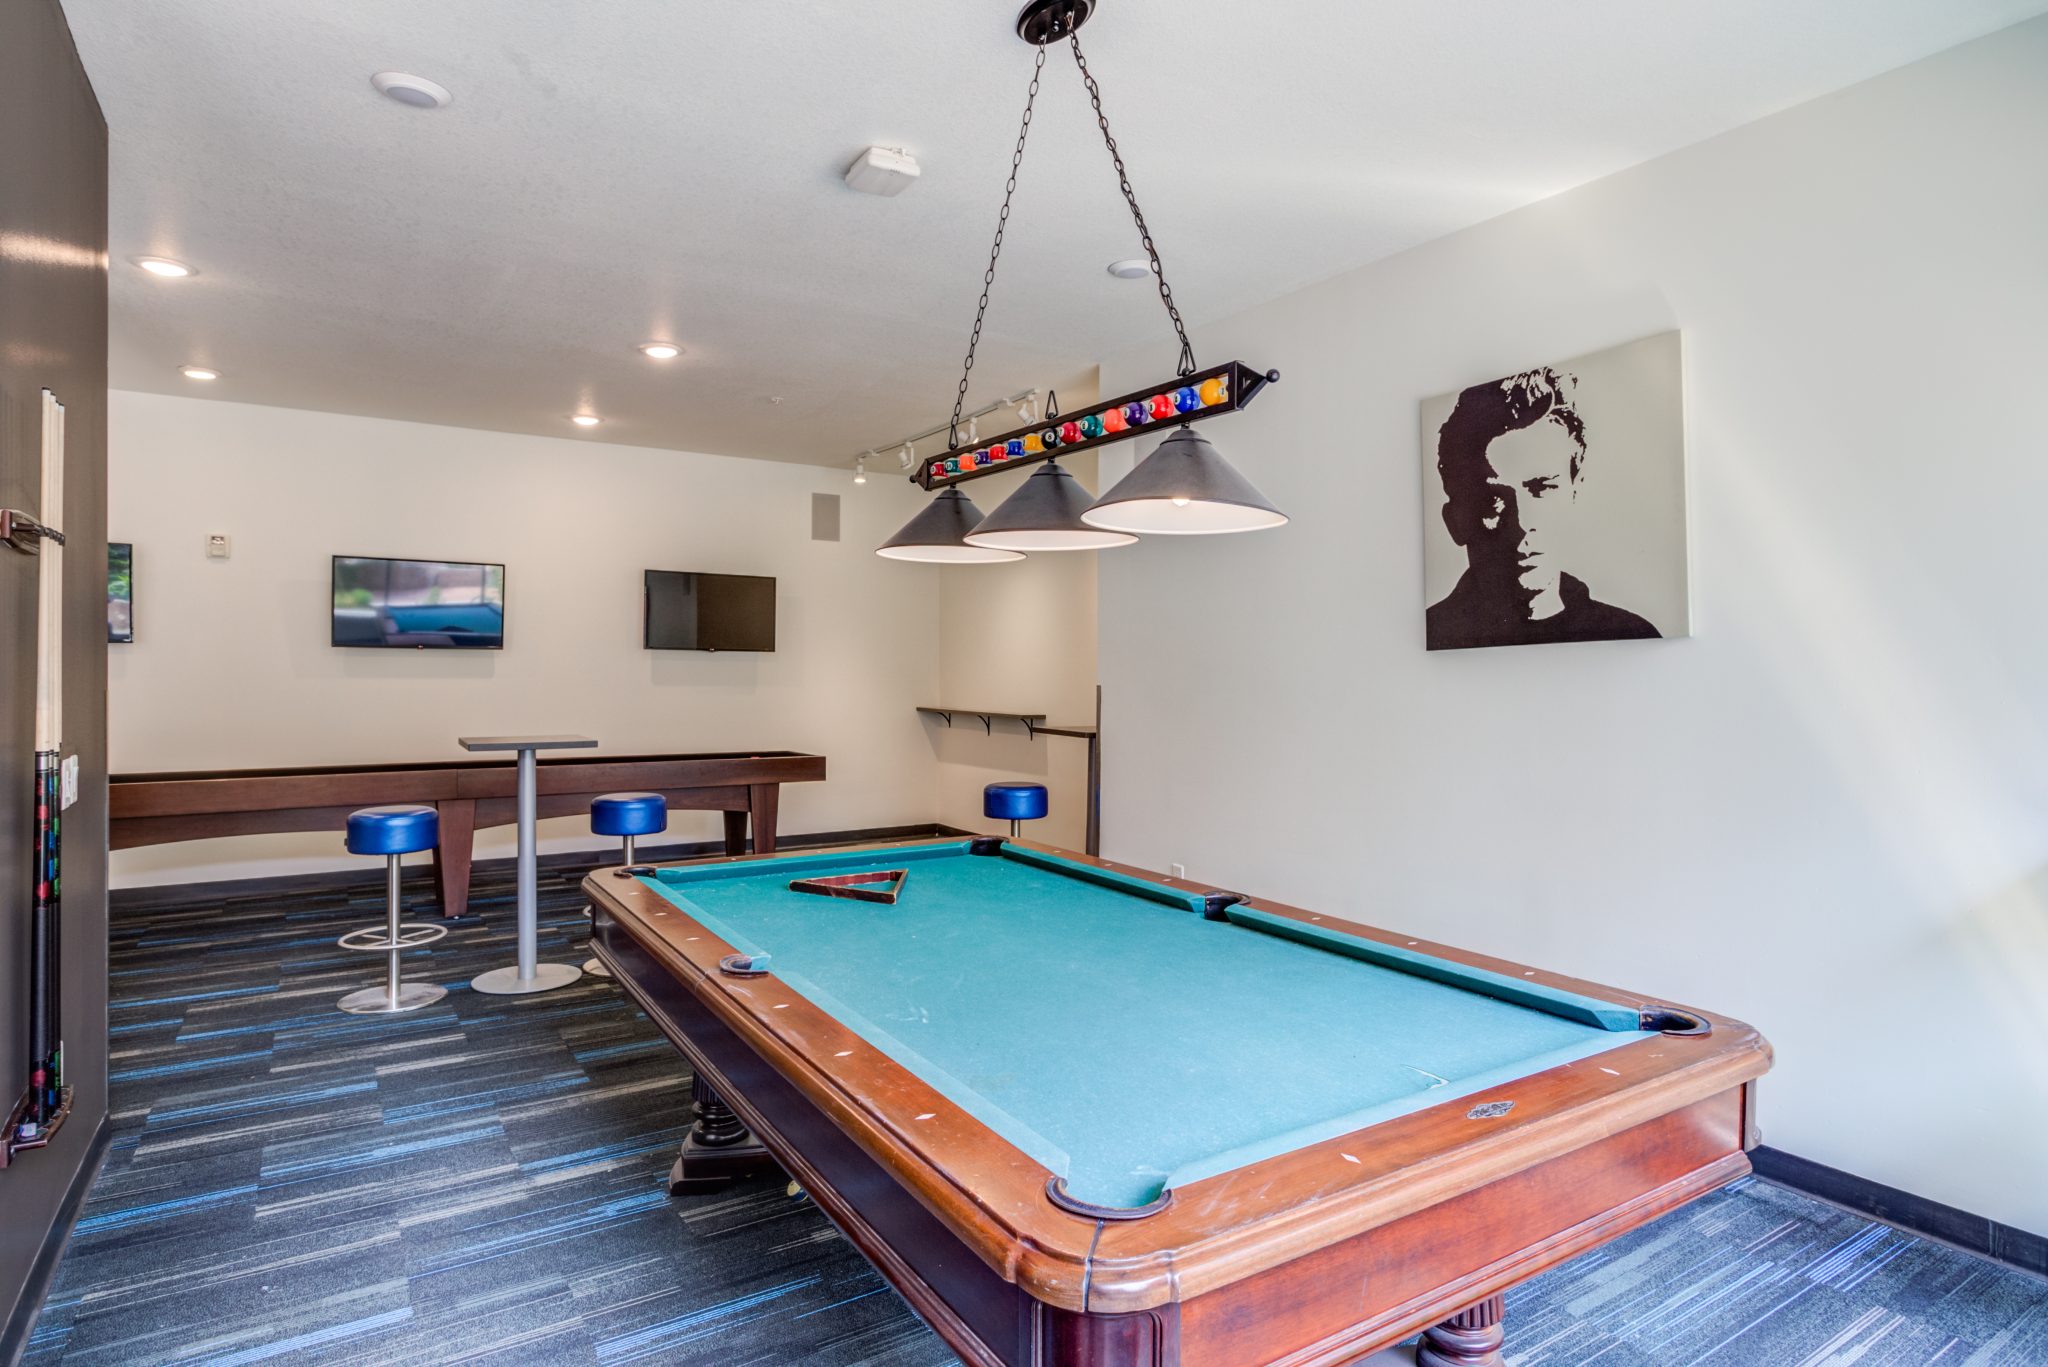 the knoll dinkytown off campus apartments near the university of minnesota resident clubhouse game room billiard table